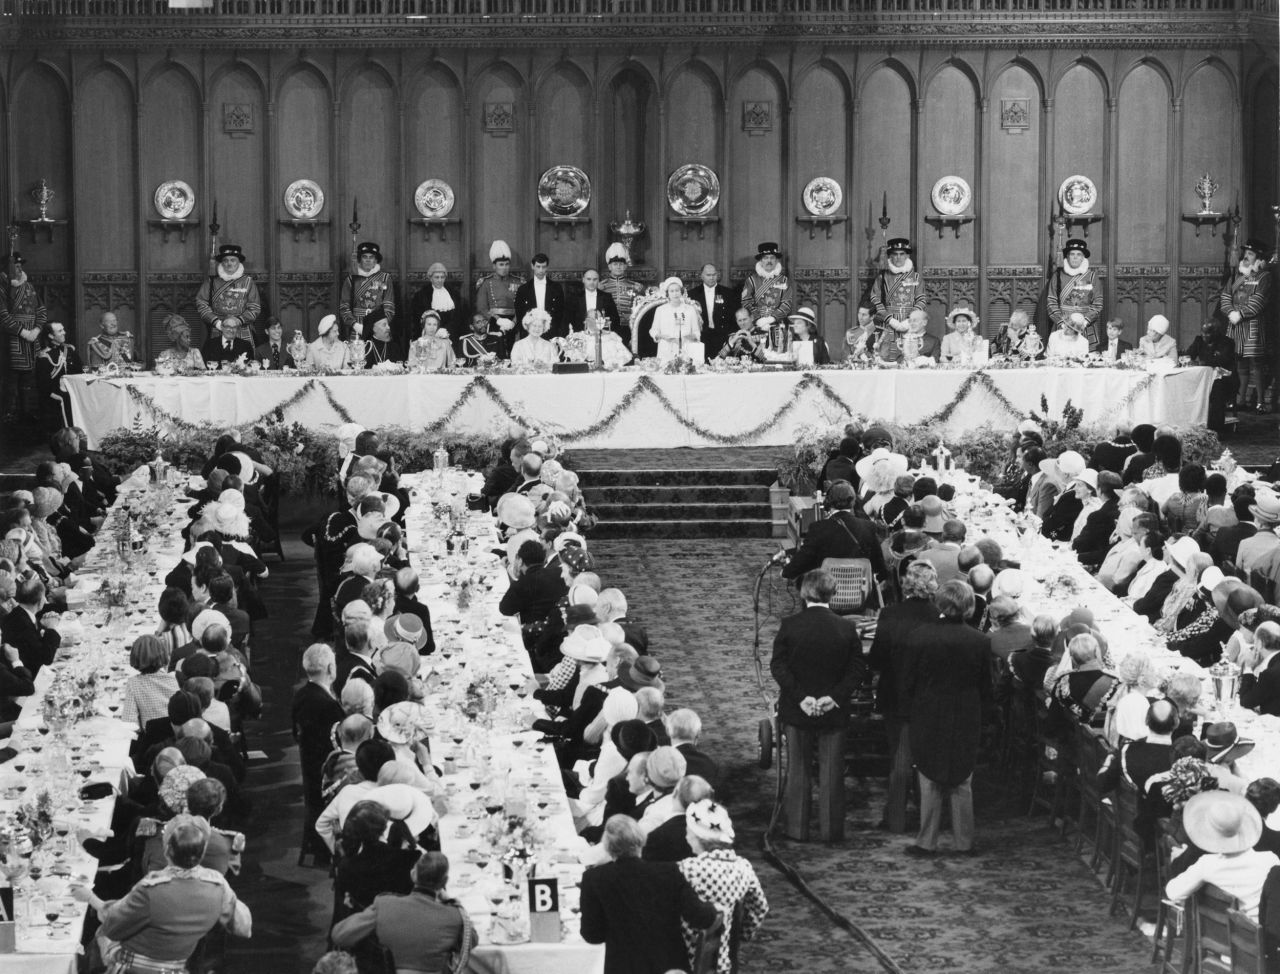 After the service, the Queen and members of the royal family go to a celebratory Commonwealth lunch at the Guildhall. Among those seated at the top table are her four children, as well as her mother and sister, the Queen Mother and Princess Margaret. She says in a speech: "My Lord Mayor, when I was 21 I pledged my life to the service of our people and I asked for God's help to make good that vow. Although that vow was made in my salad days, when I was green in judgment, I do not regret nor retract one word of it."